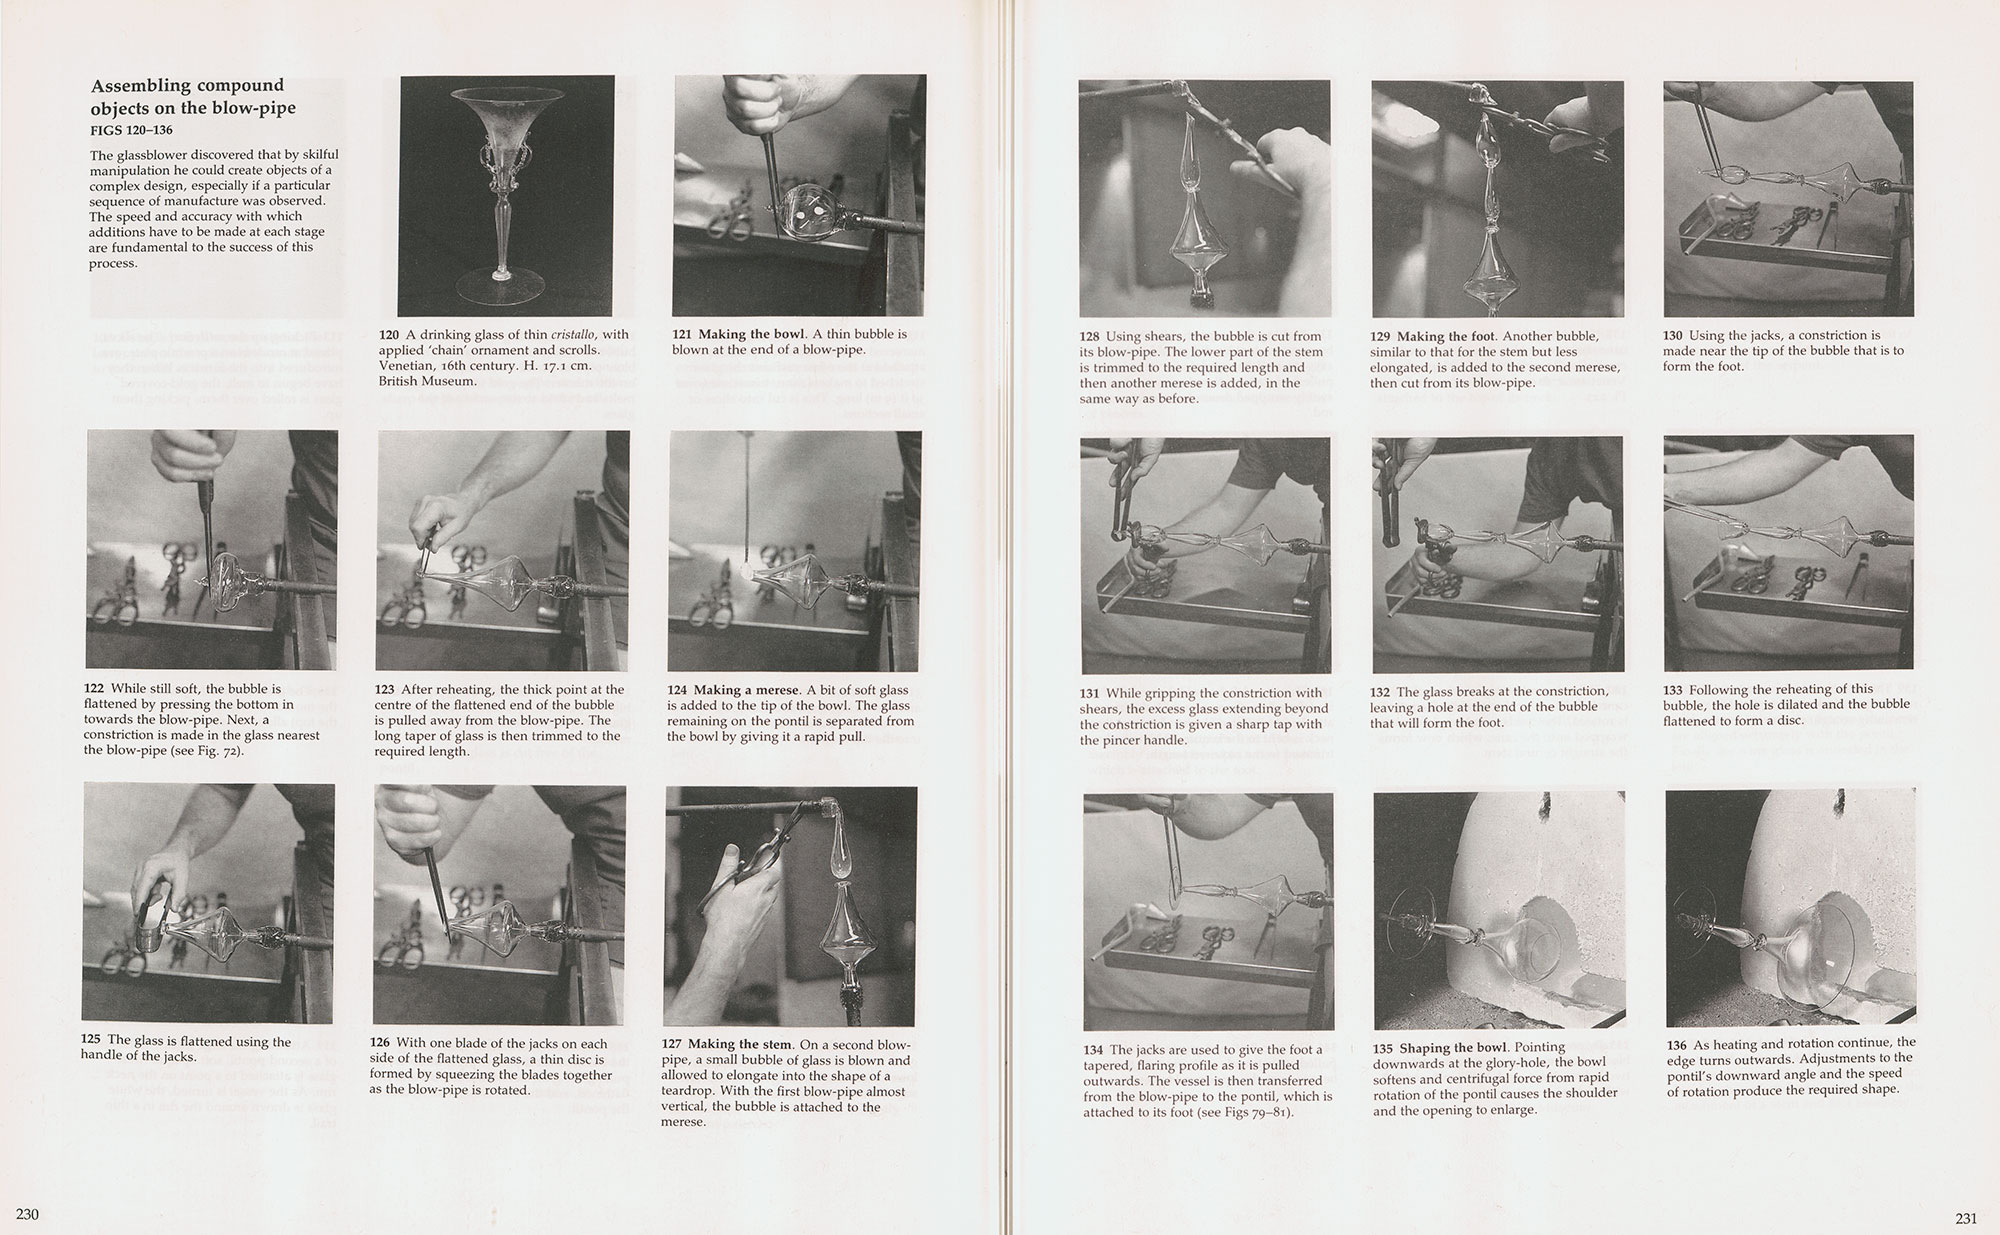 Two pages showing 17 thumbnail images of assembling compound objects on the blowpipe